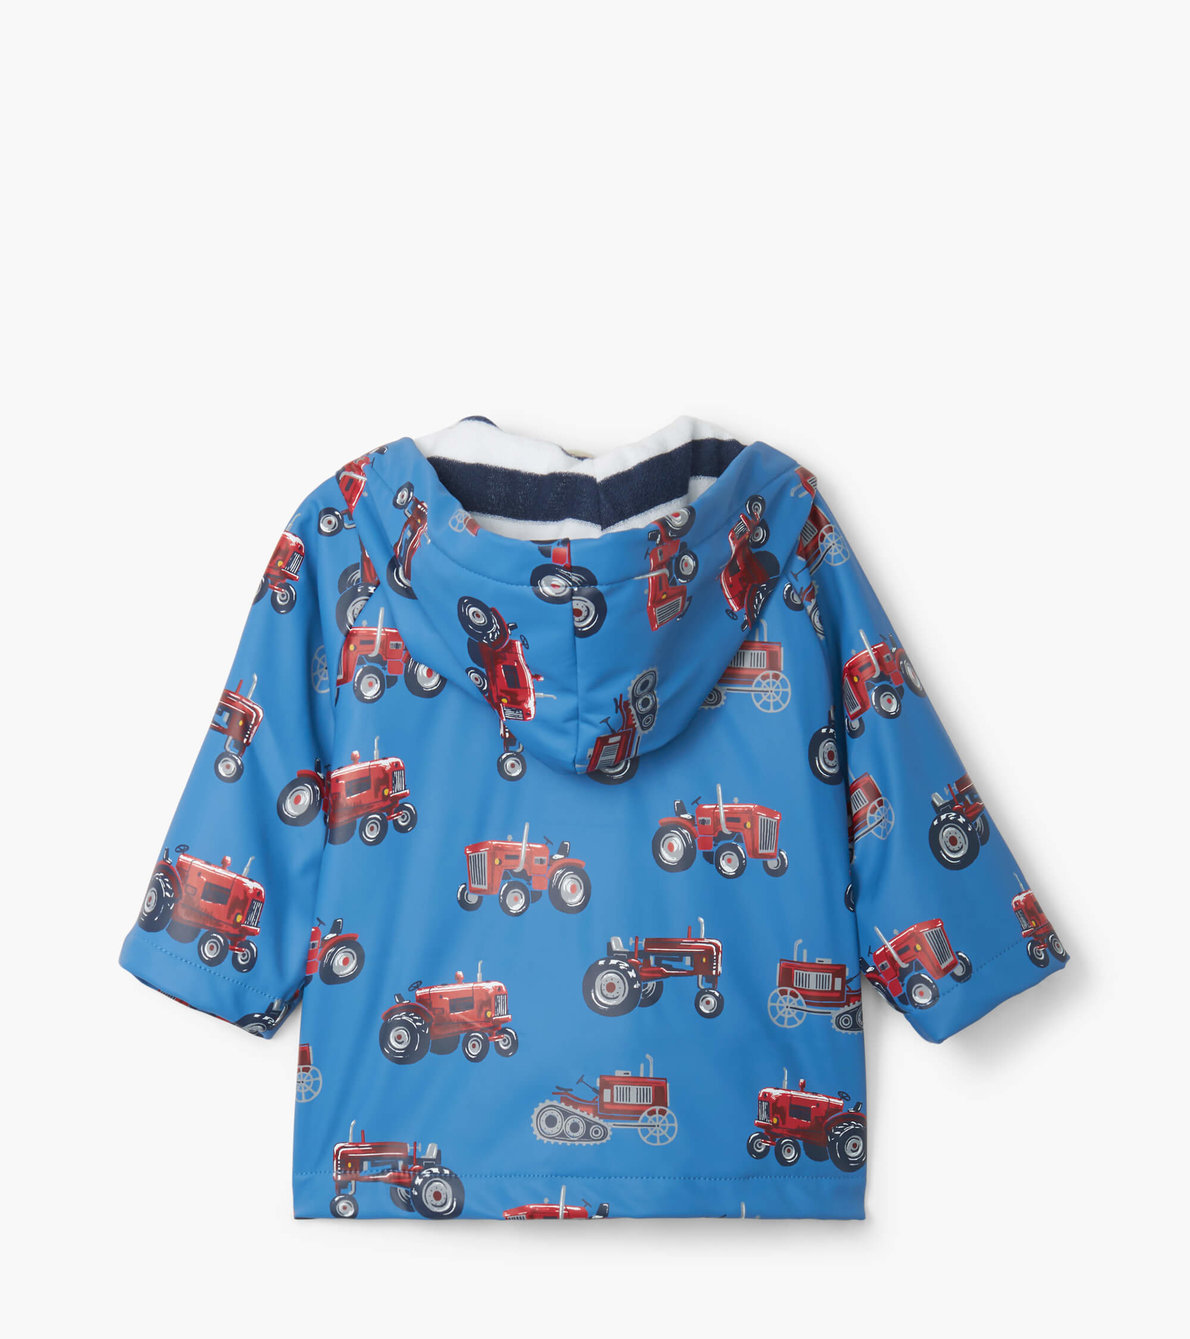 View larger image of Vintage Tractors Baby Raincoat